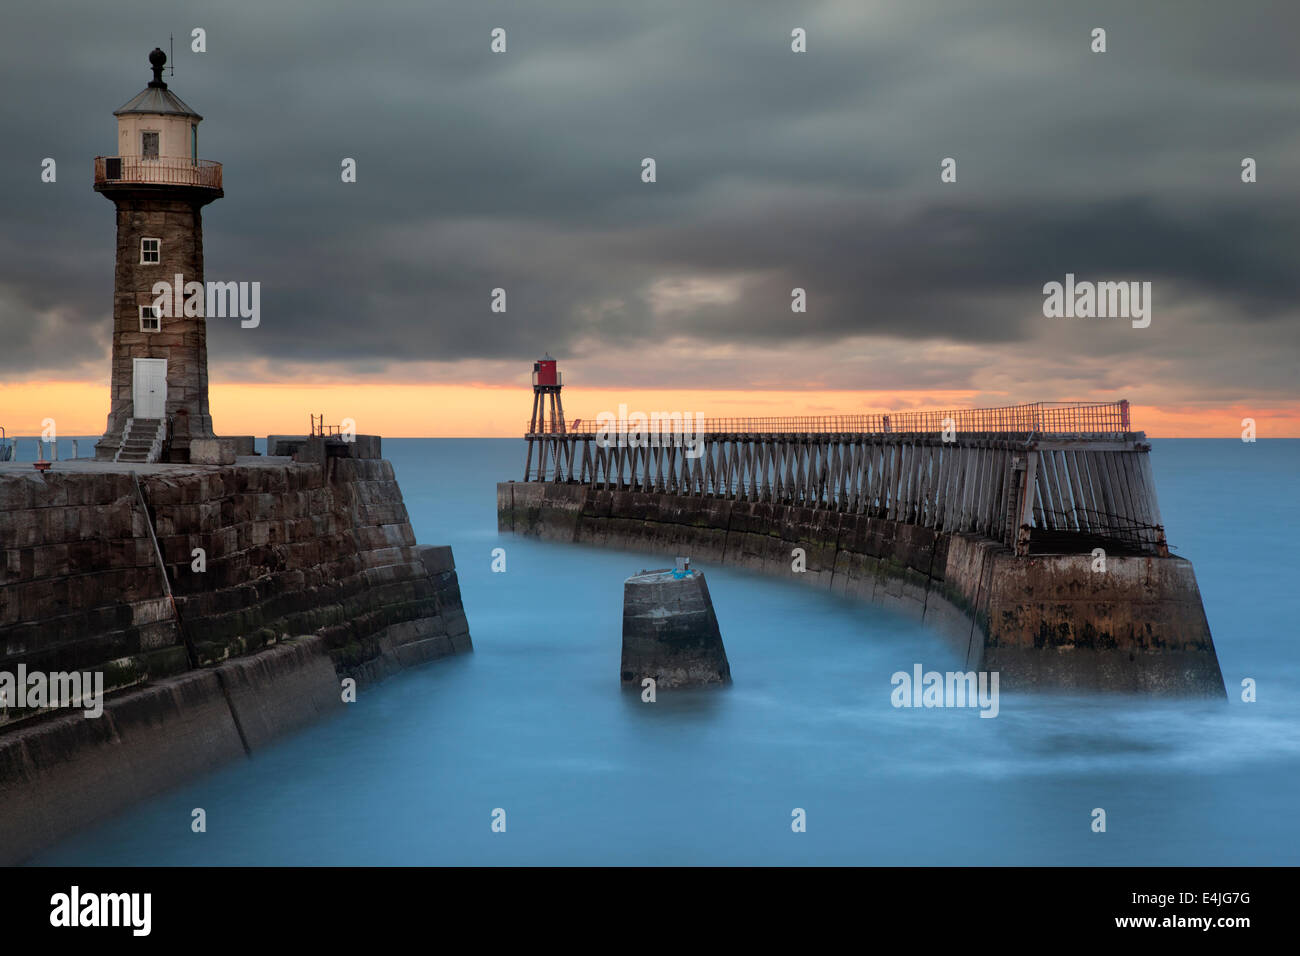 The Old Lighthouse on The East Pier at Whitby, North Yorkshire, UK Stock Photo